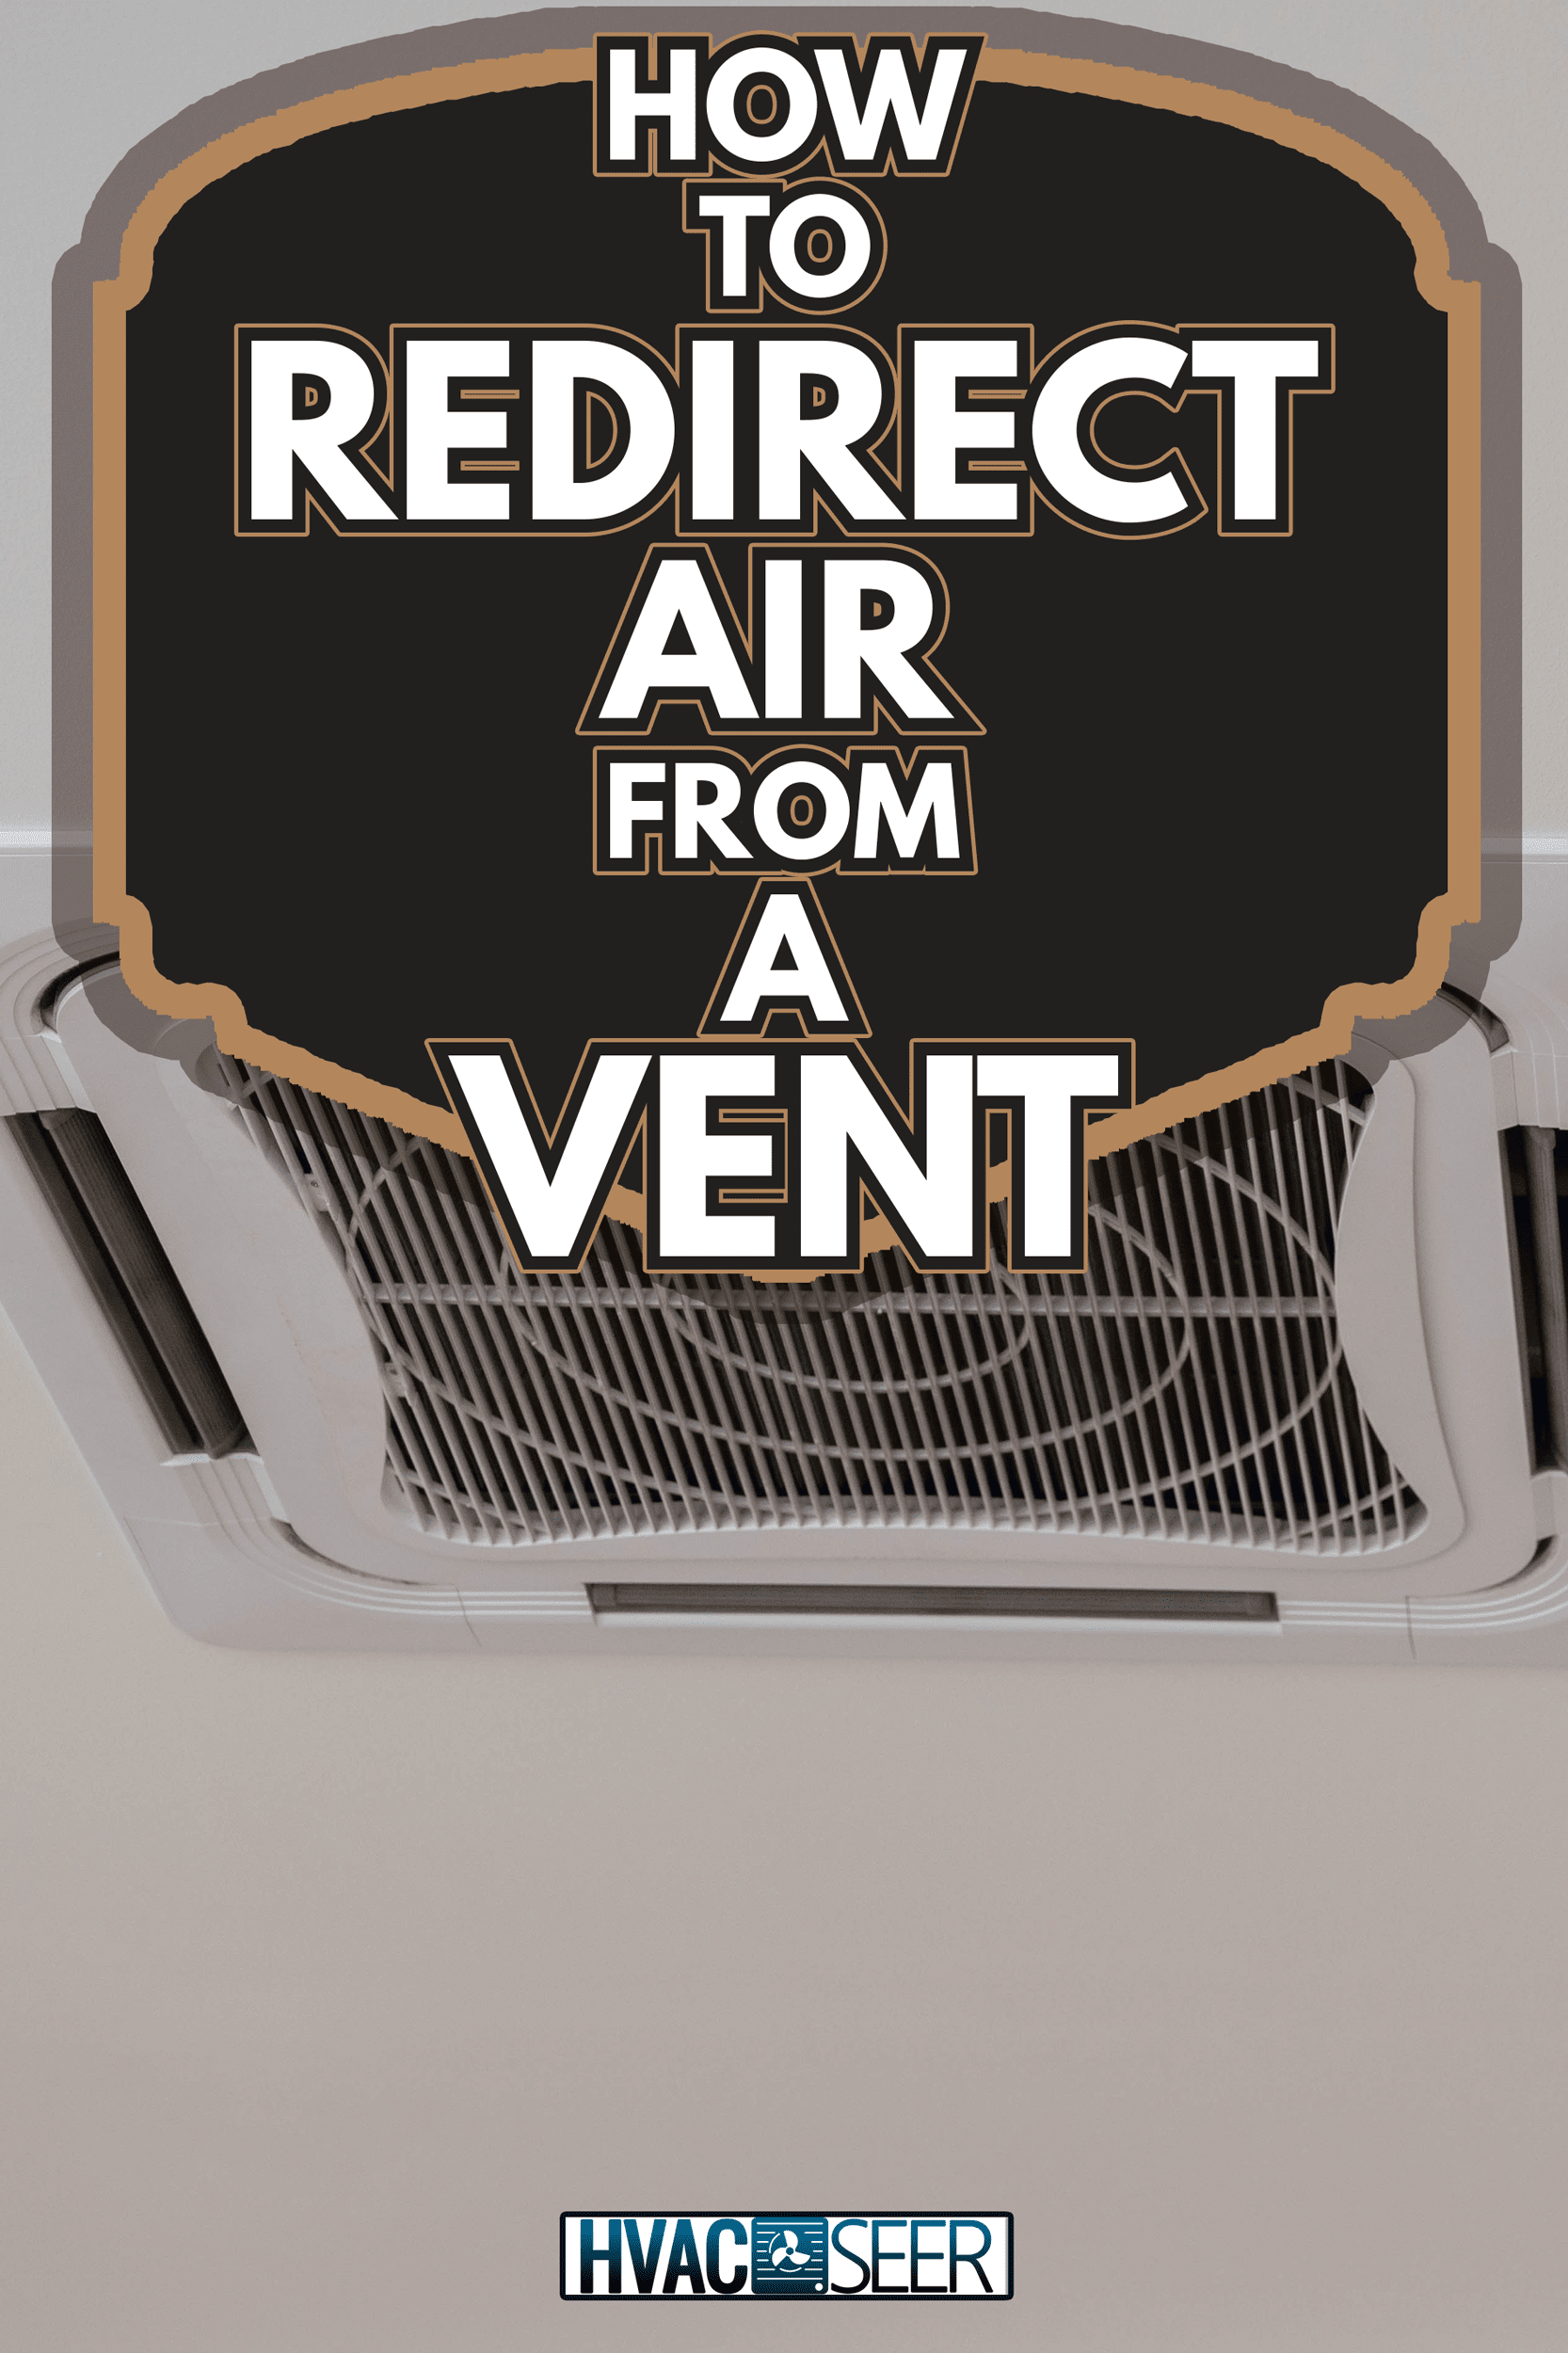 Ceiling air conditioner in the office building - How To Redirect Air From A Vent